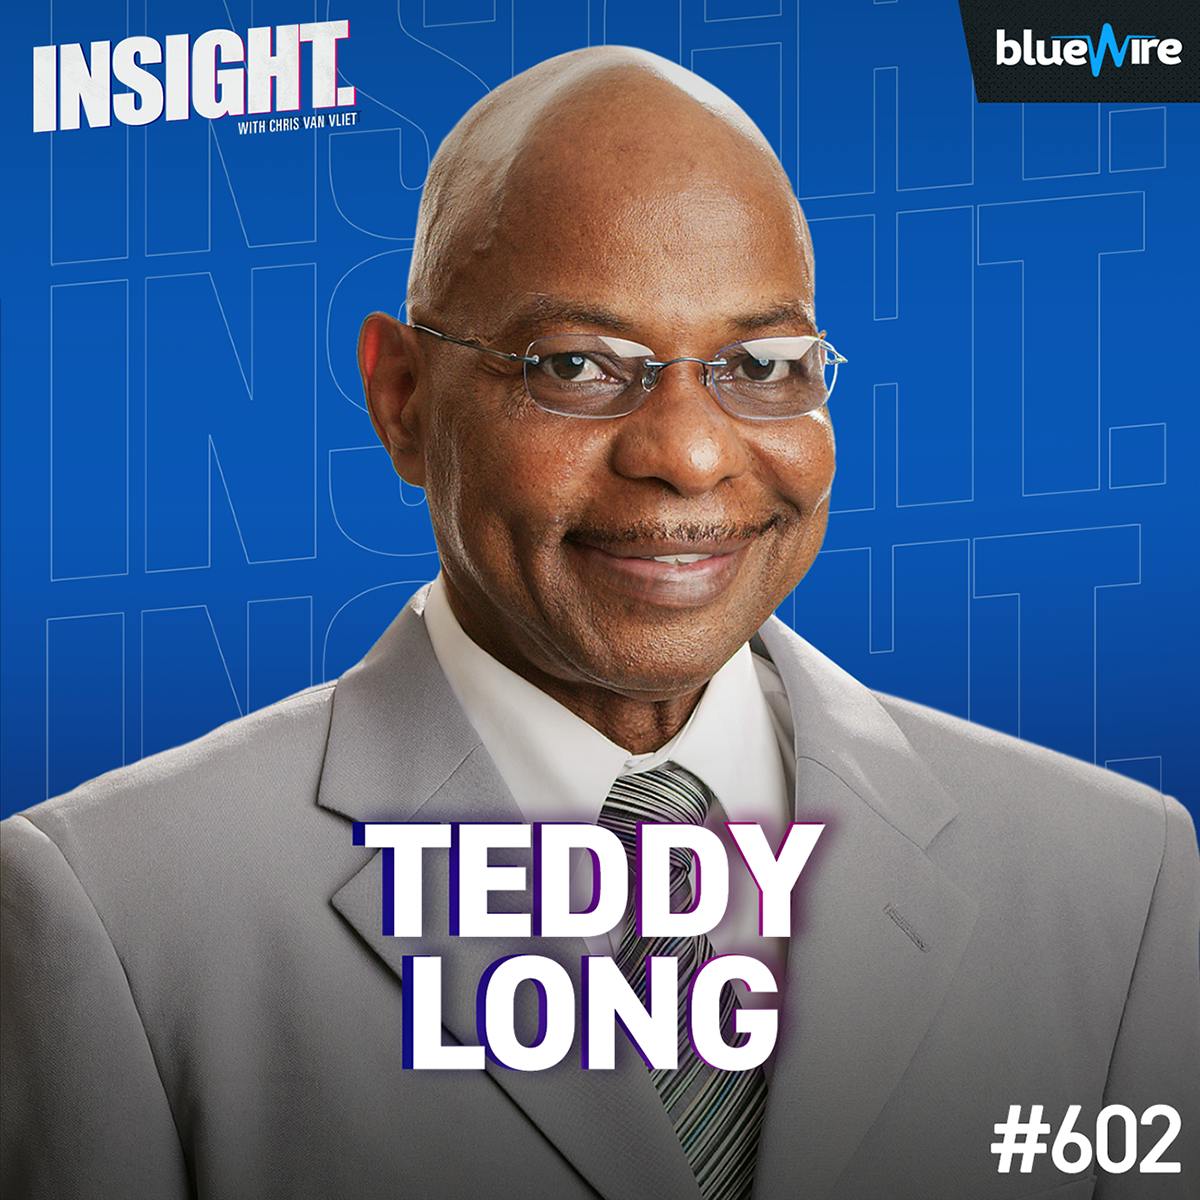 Teddy Long: Smackdown's Best GM! One-on-One With The Undertaker, Buckle Up Teddy & More!